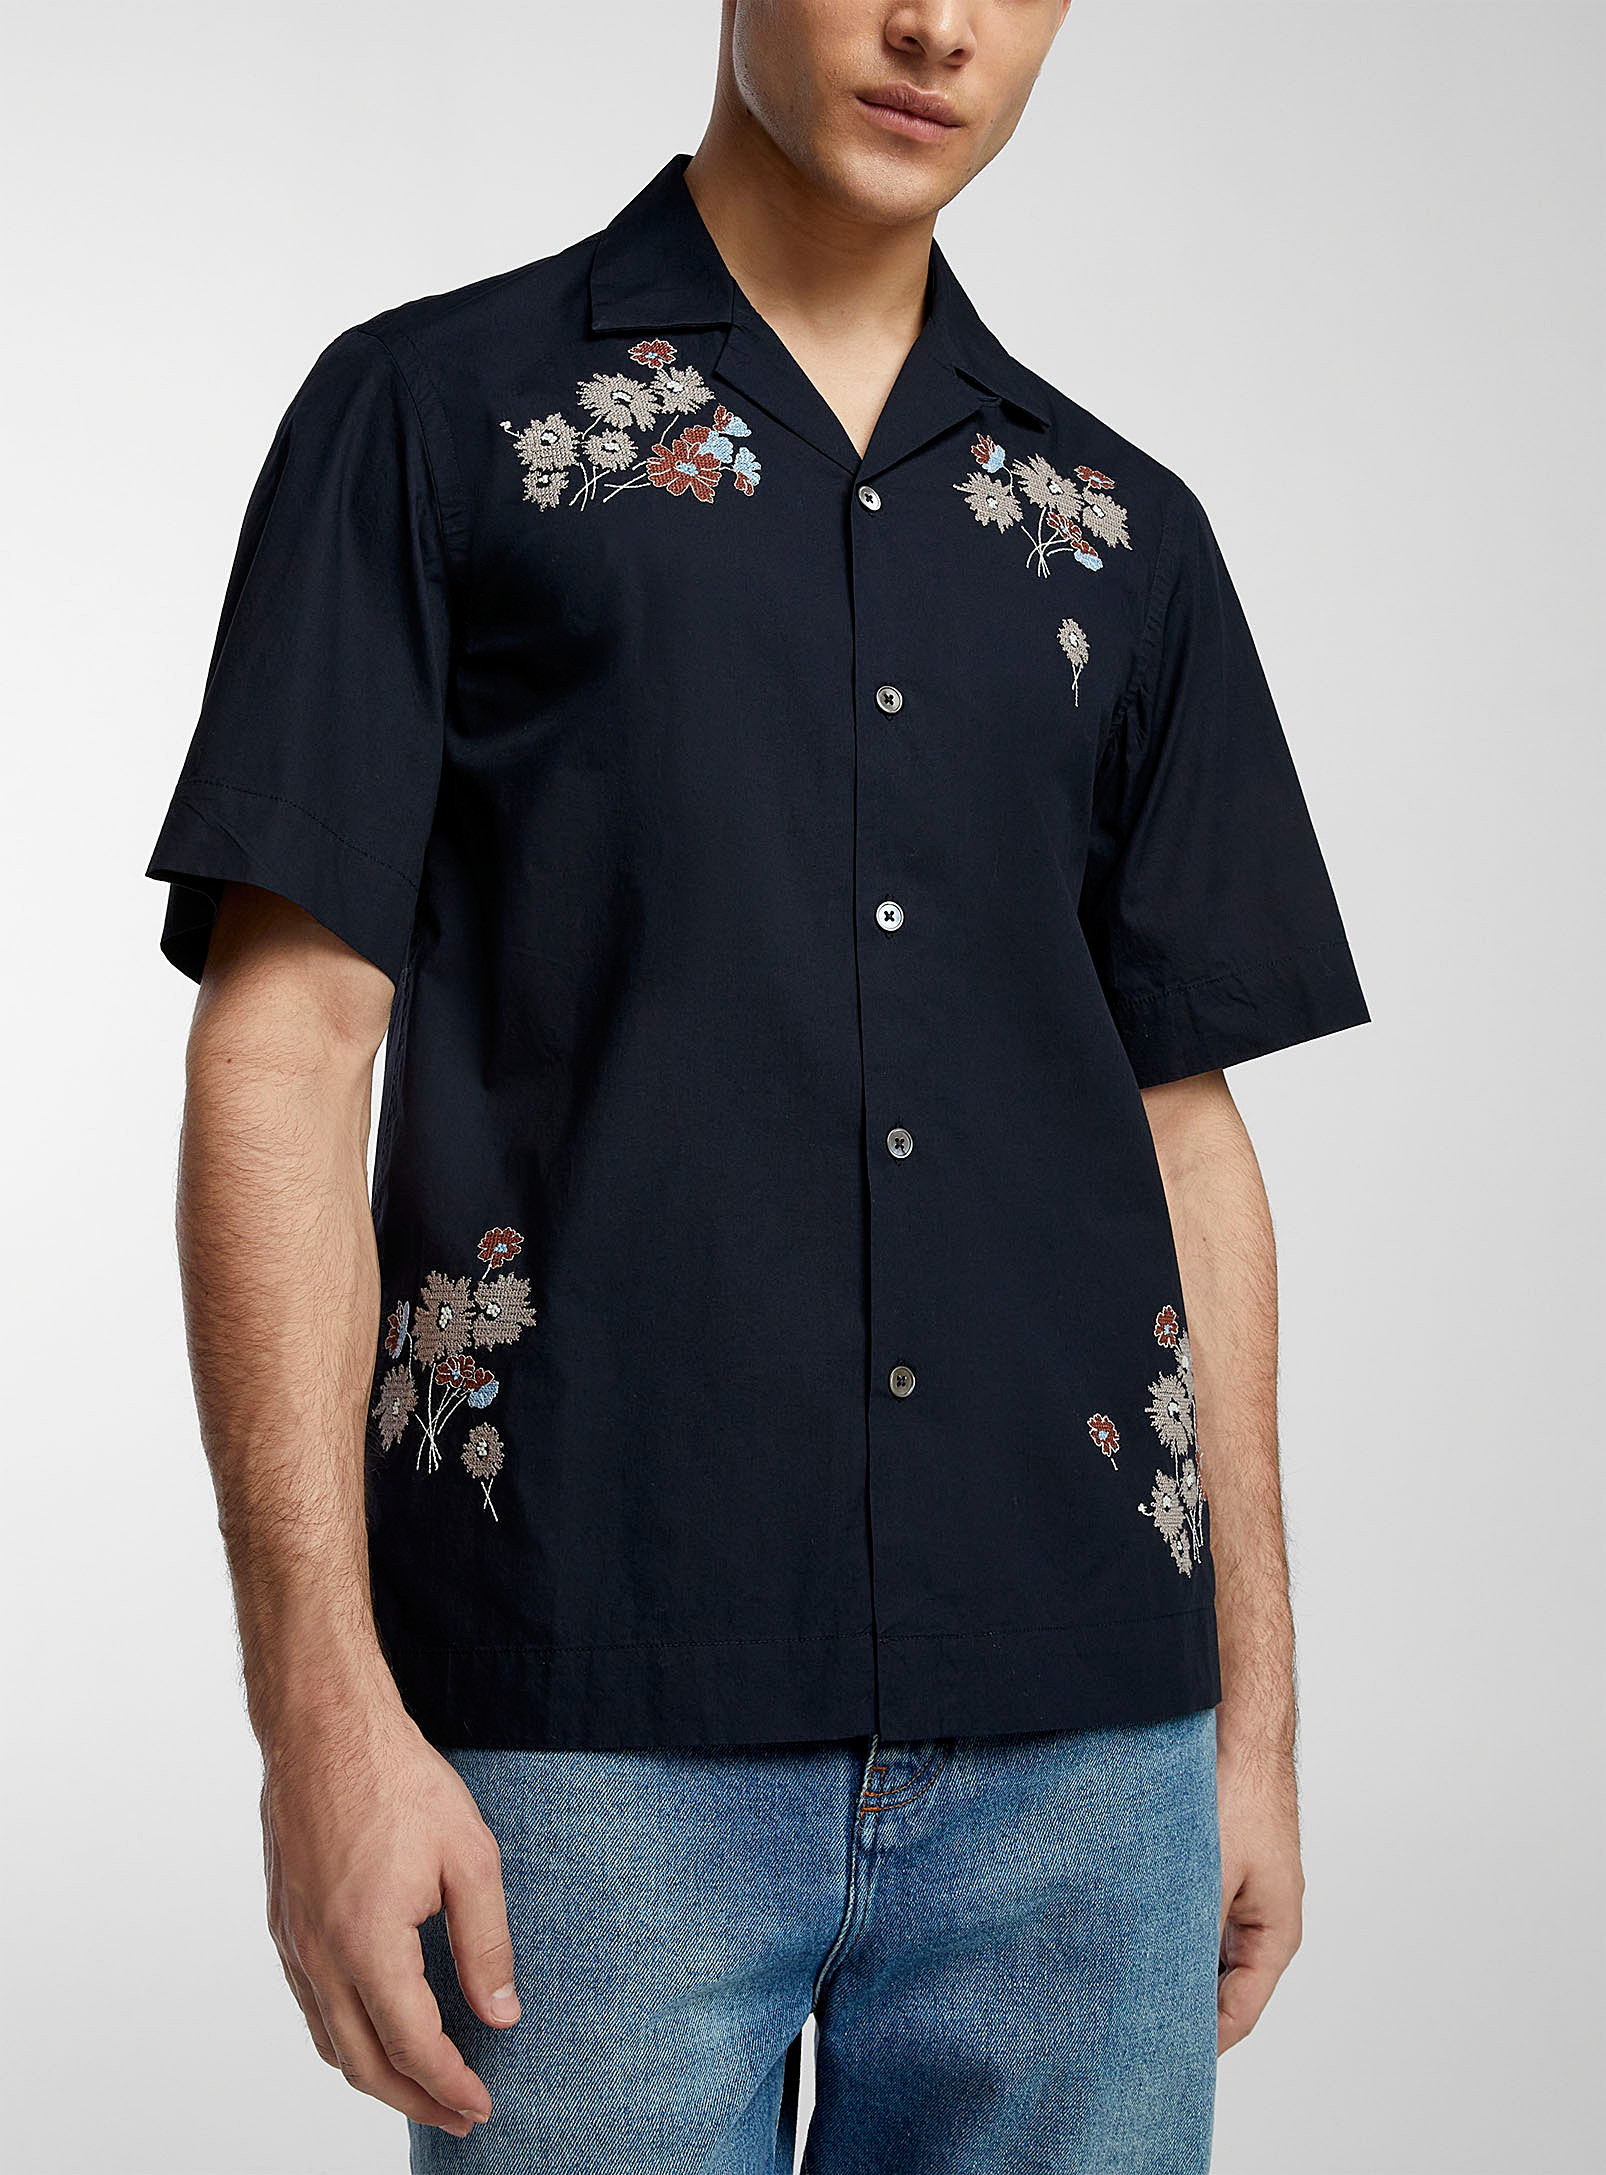 Paul Smith - Men's Embroidered bouquets shirt